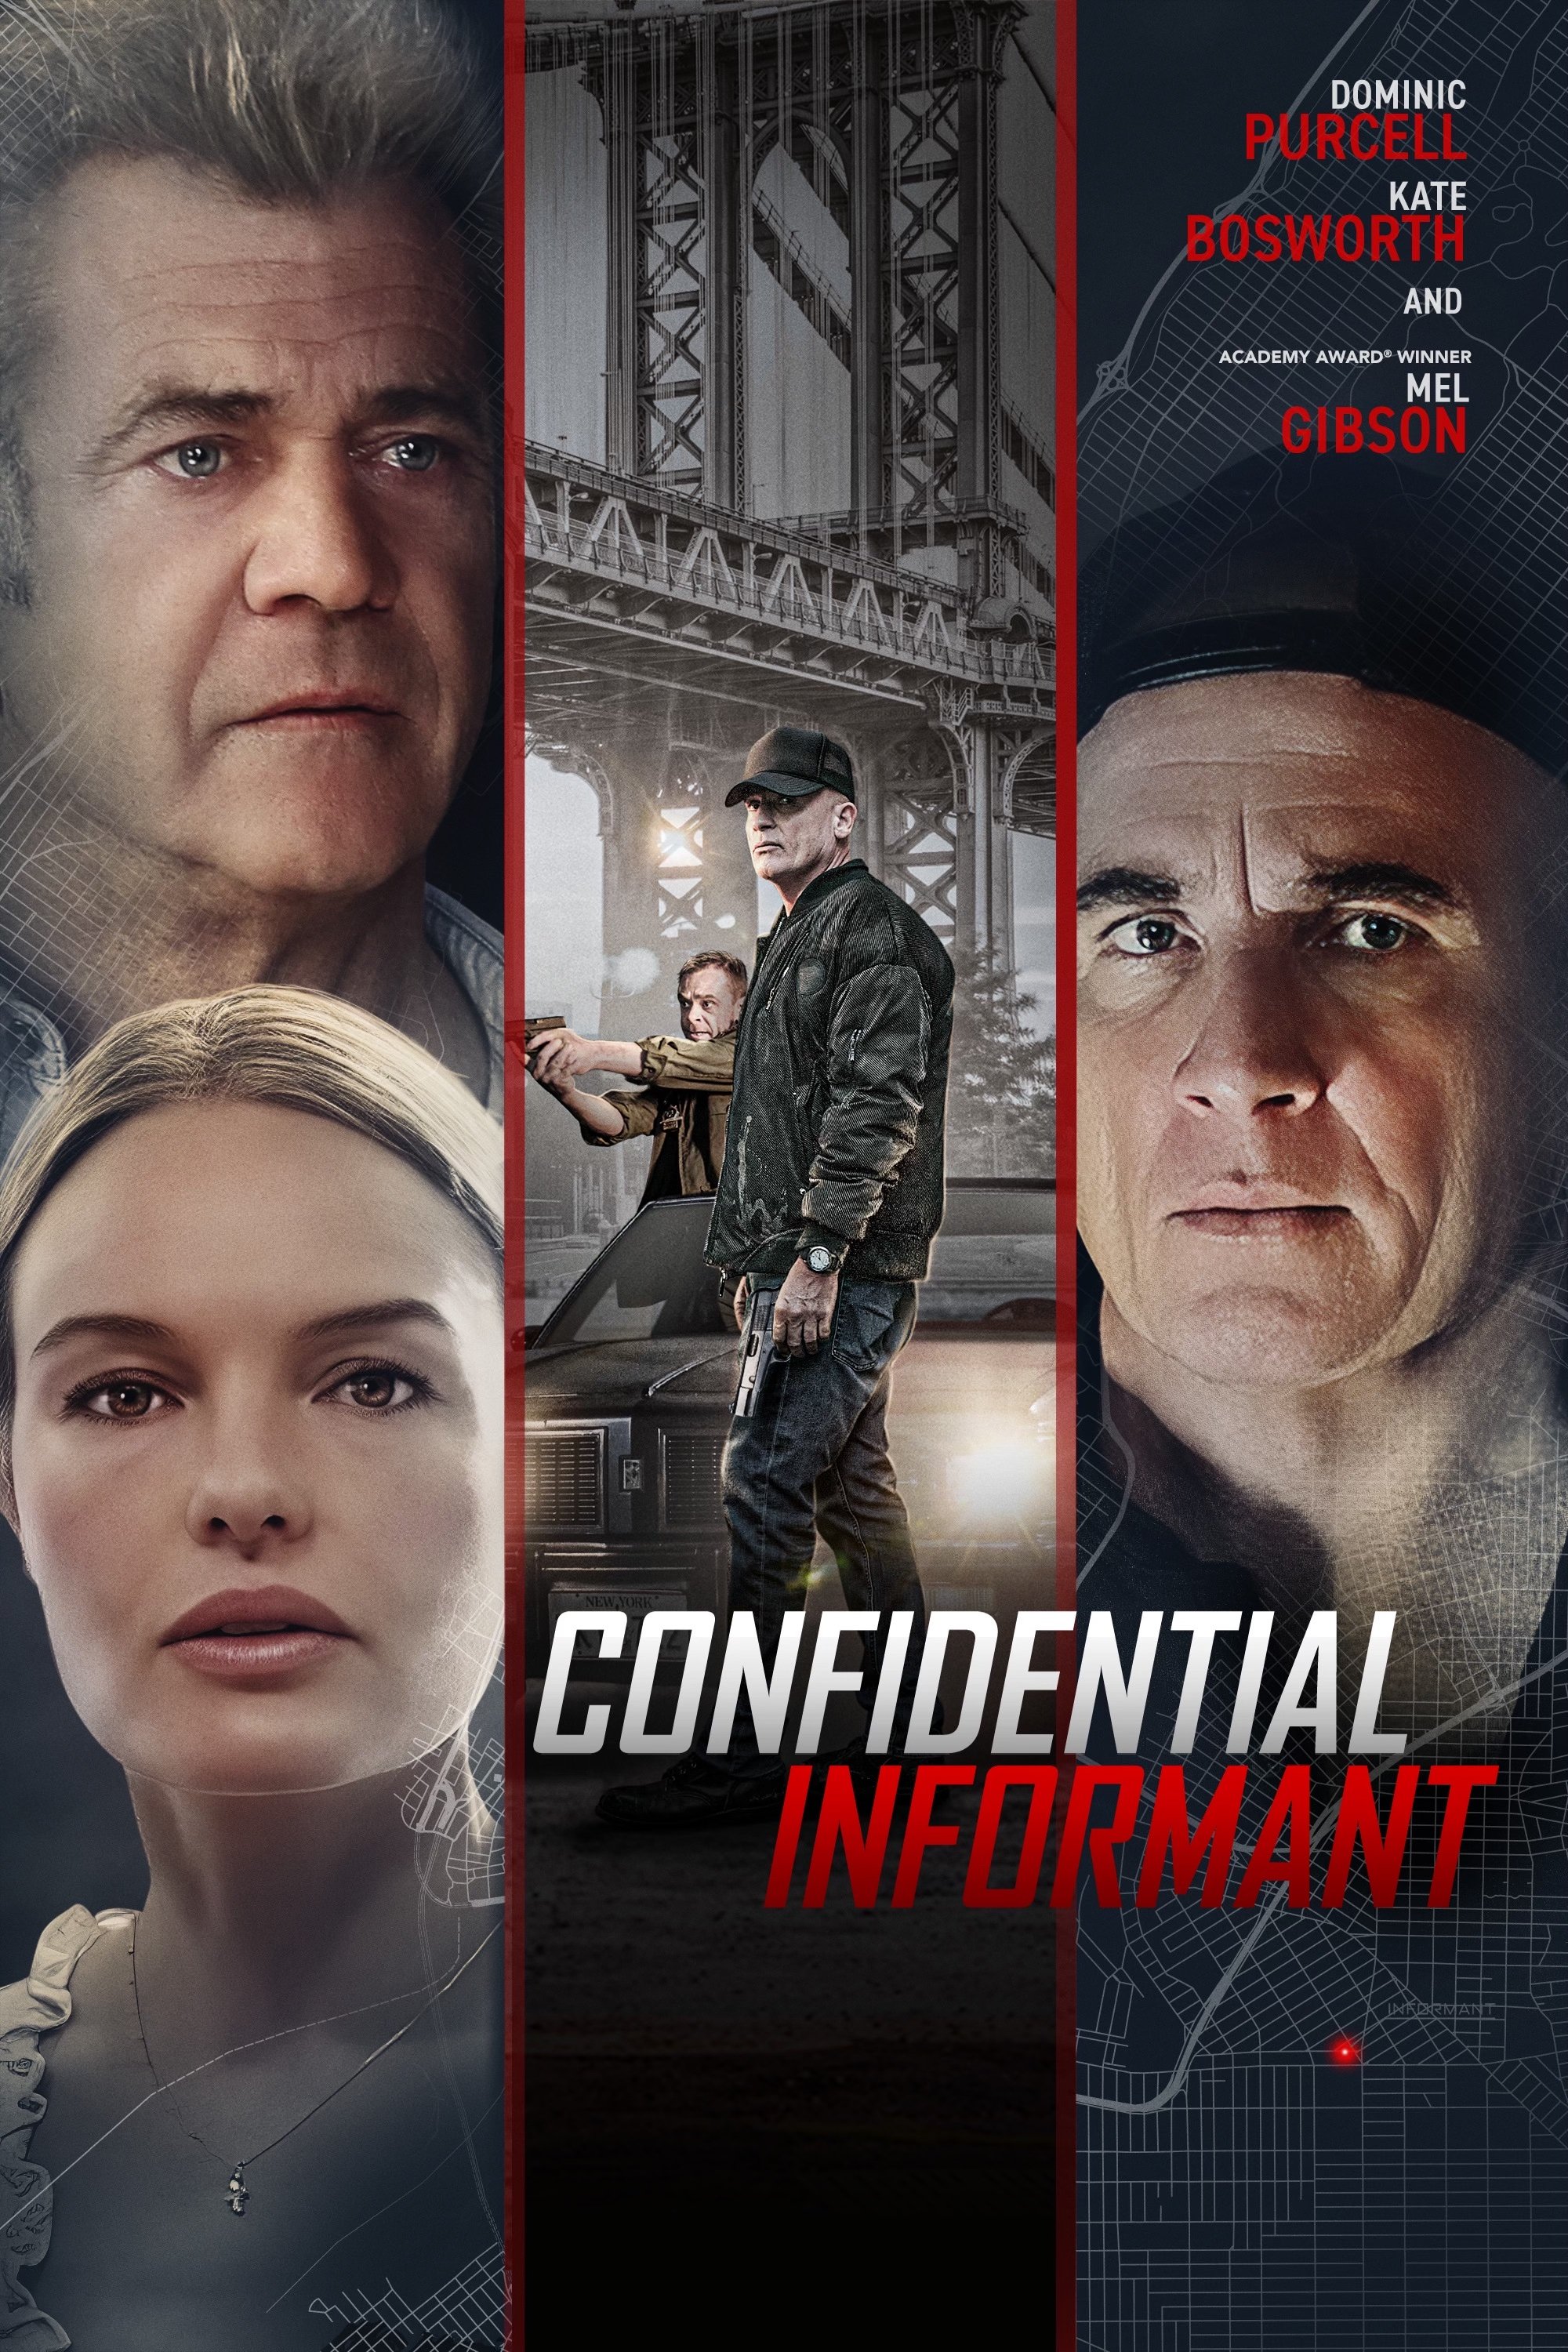   Confidential Informant,  which Nasser re-wrote in its entirety, debuted over this past summer. The film stars Mel Gibson, Kate Bosworth and Dominic Purcell.   Film poster and stills courtesy of Lionsgate  